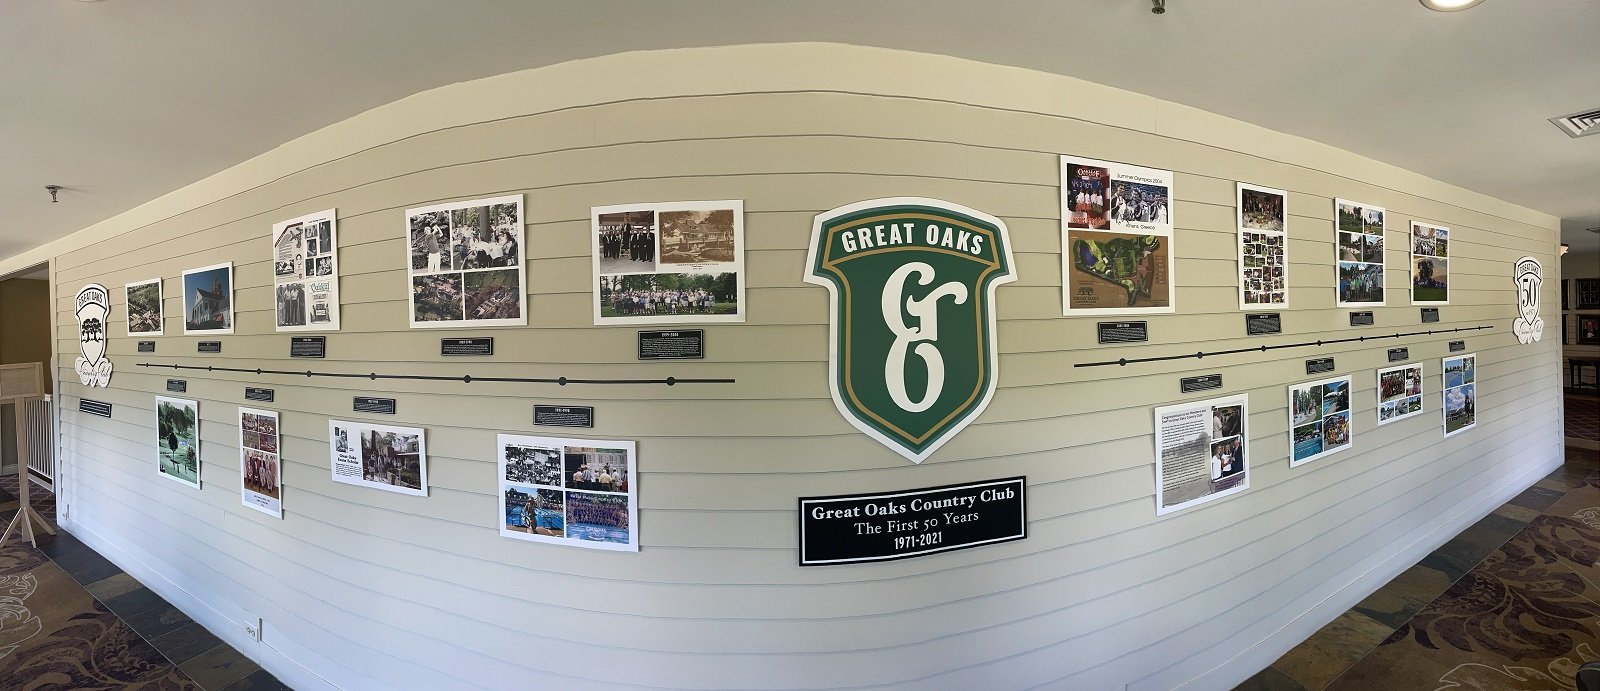 Great Oaks Country Club - Full History Wall Display